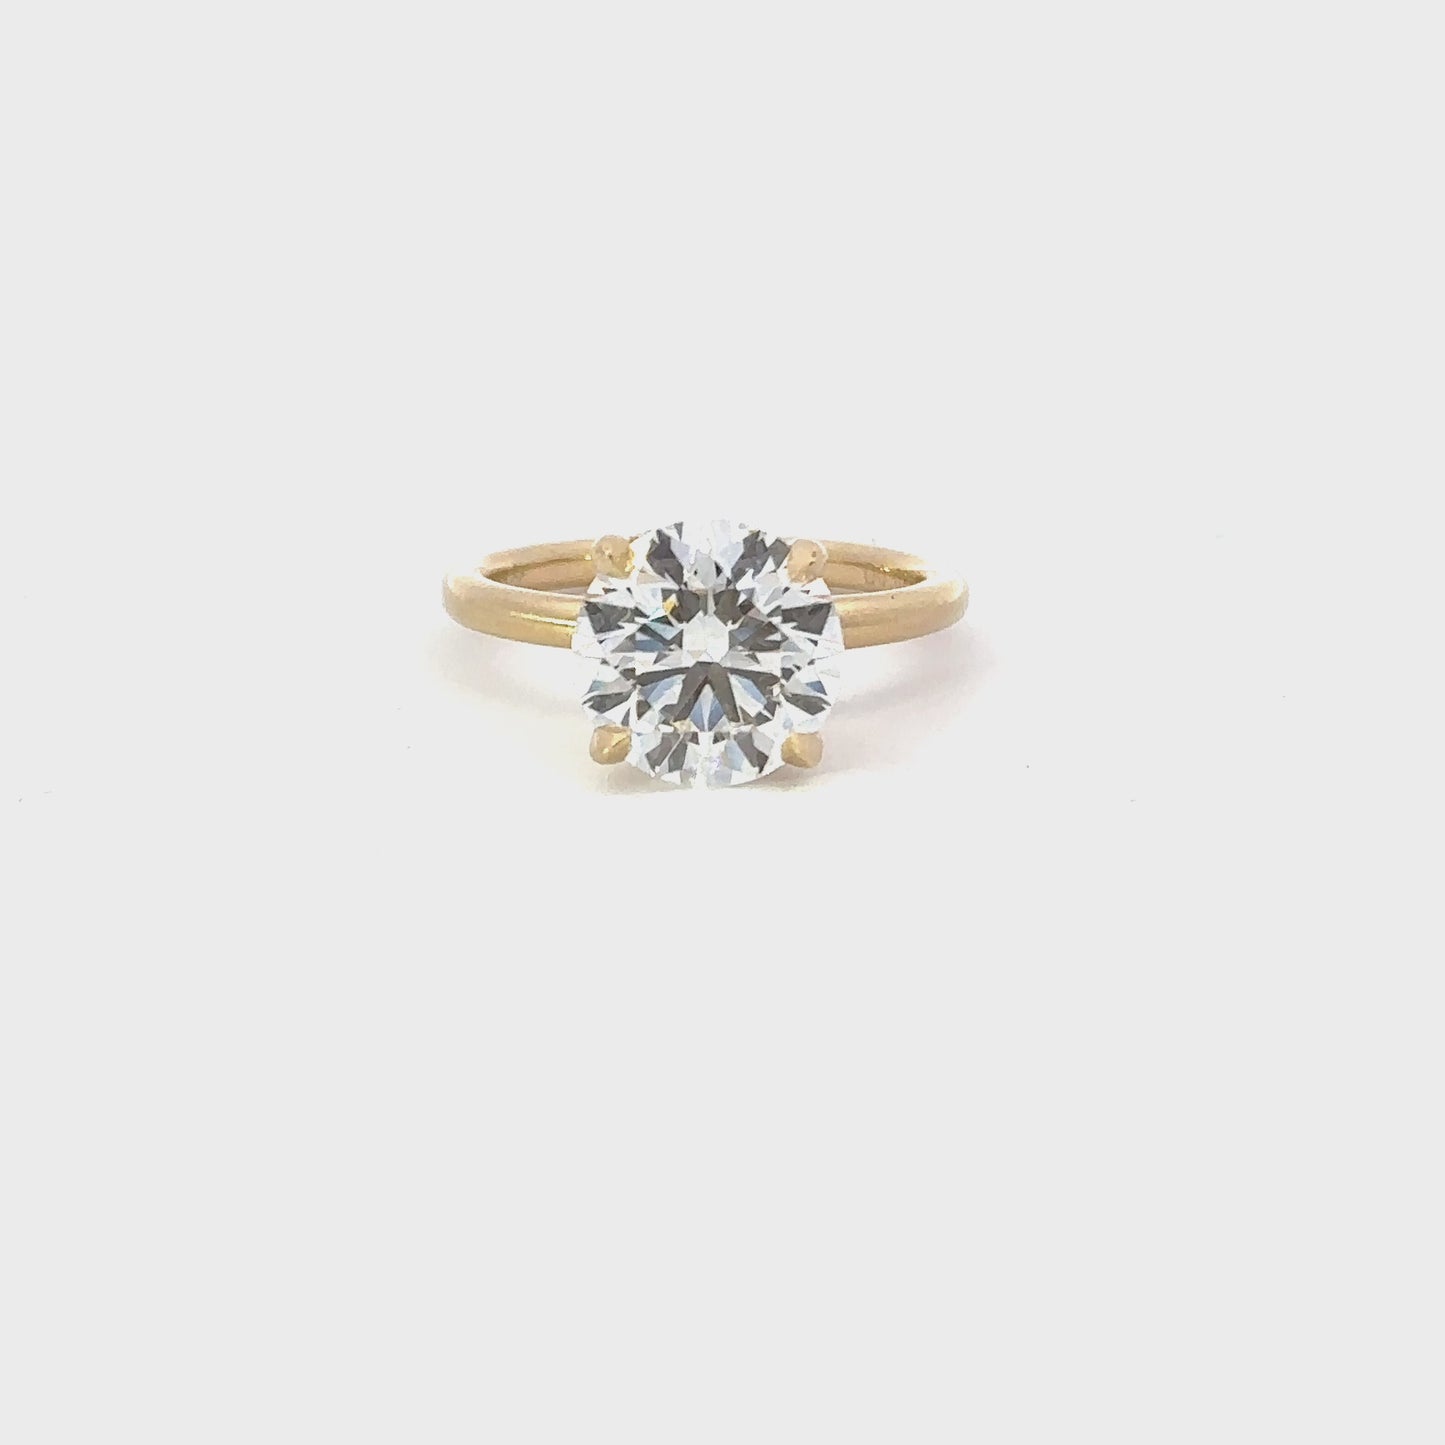 3 Round Lab Grown Diamond Engagement Rings | Engagement Ring Wednesday